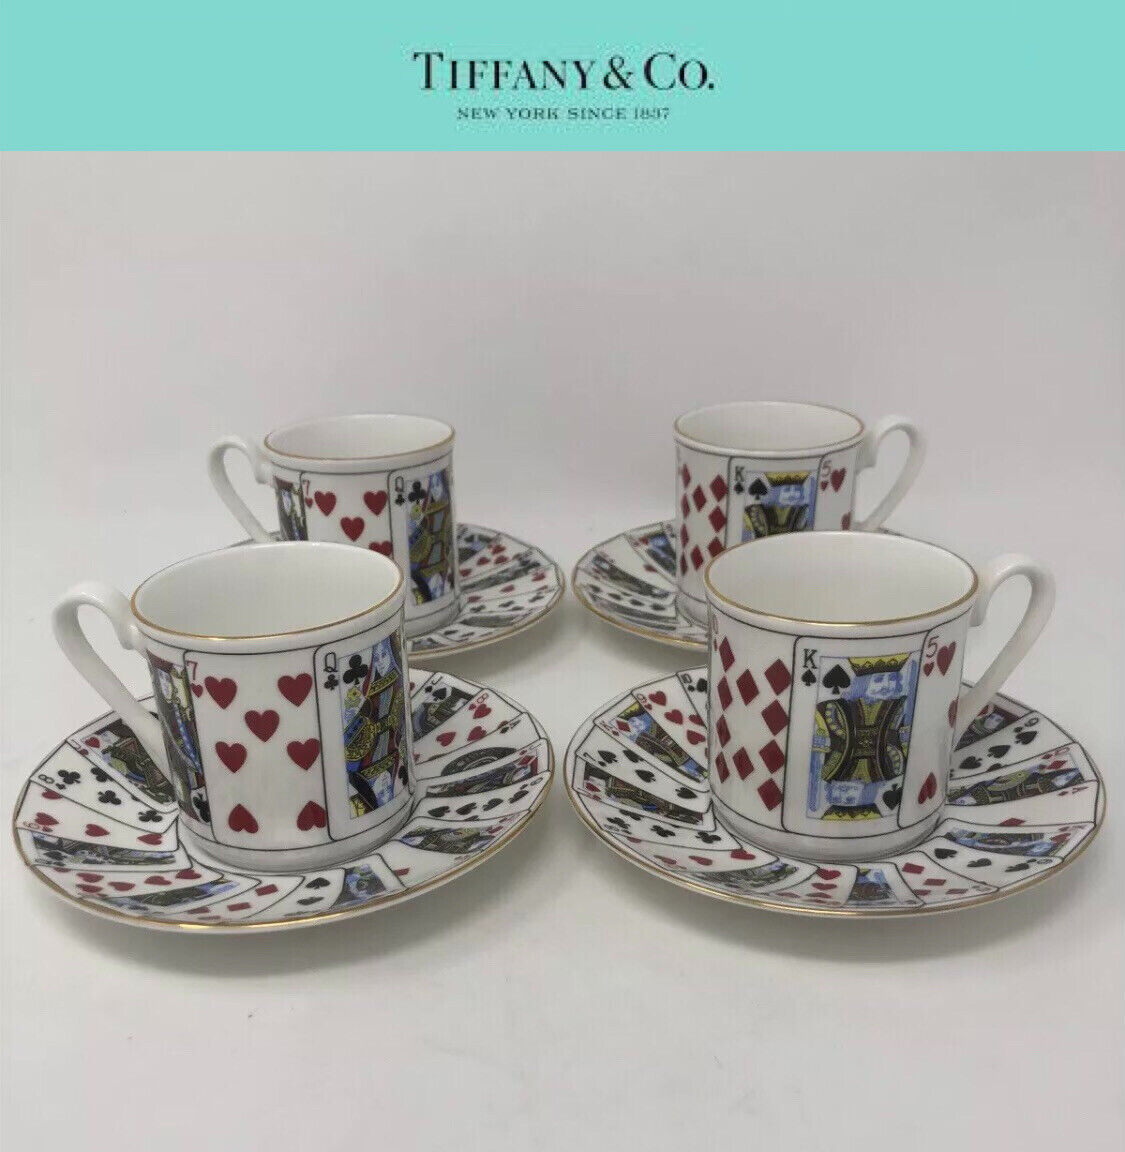 Tiffany & Co. Elizabethan Staffordshire Playing Card Demitasse 4 Cups & Saucers